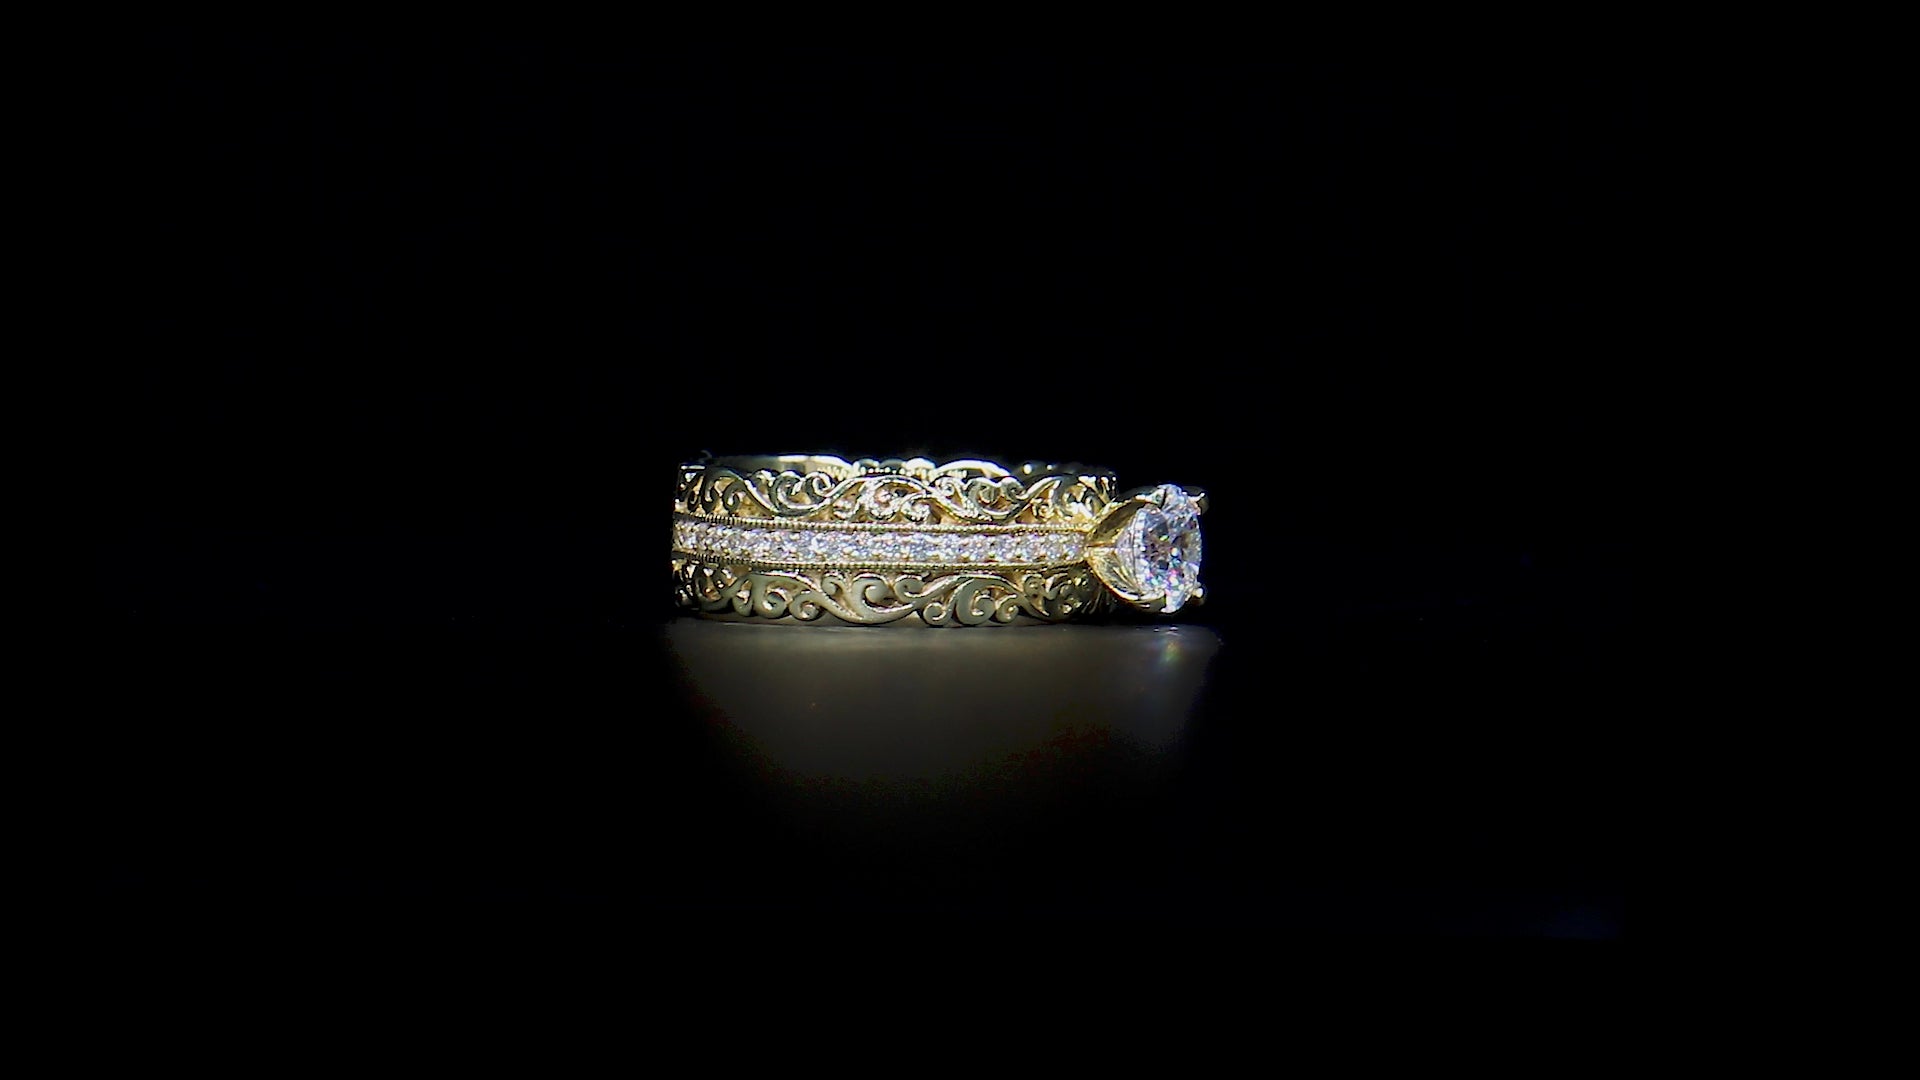 18K/ 14K Gold 6.7 mm LH Vintage Scalloped Scroll Solitaire Wide Band Ring with Diamond Milgrain Row Accent